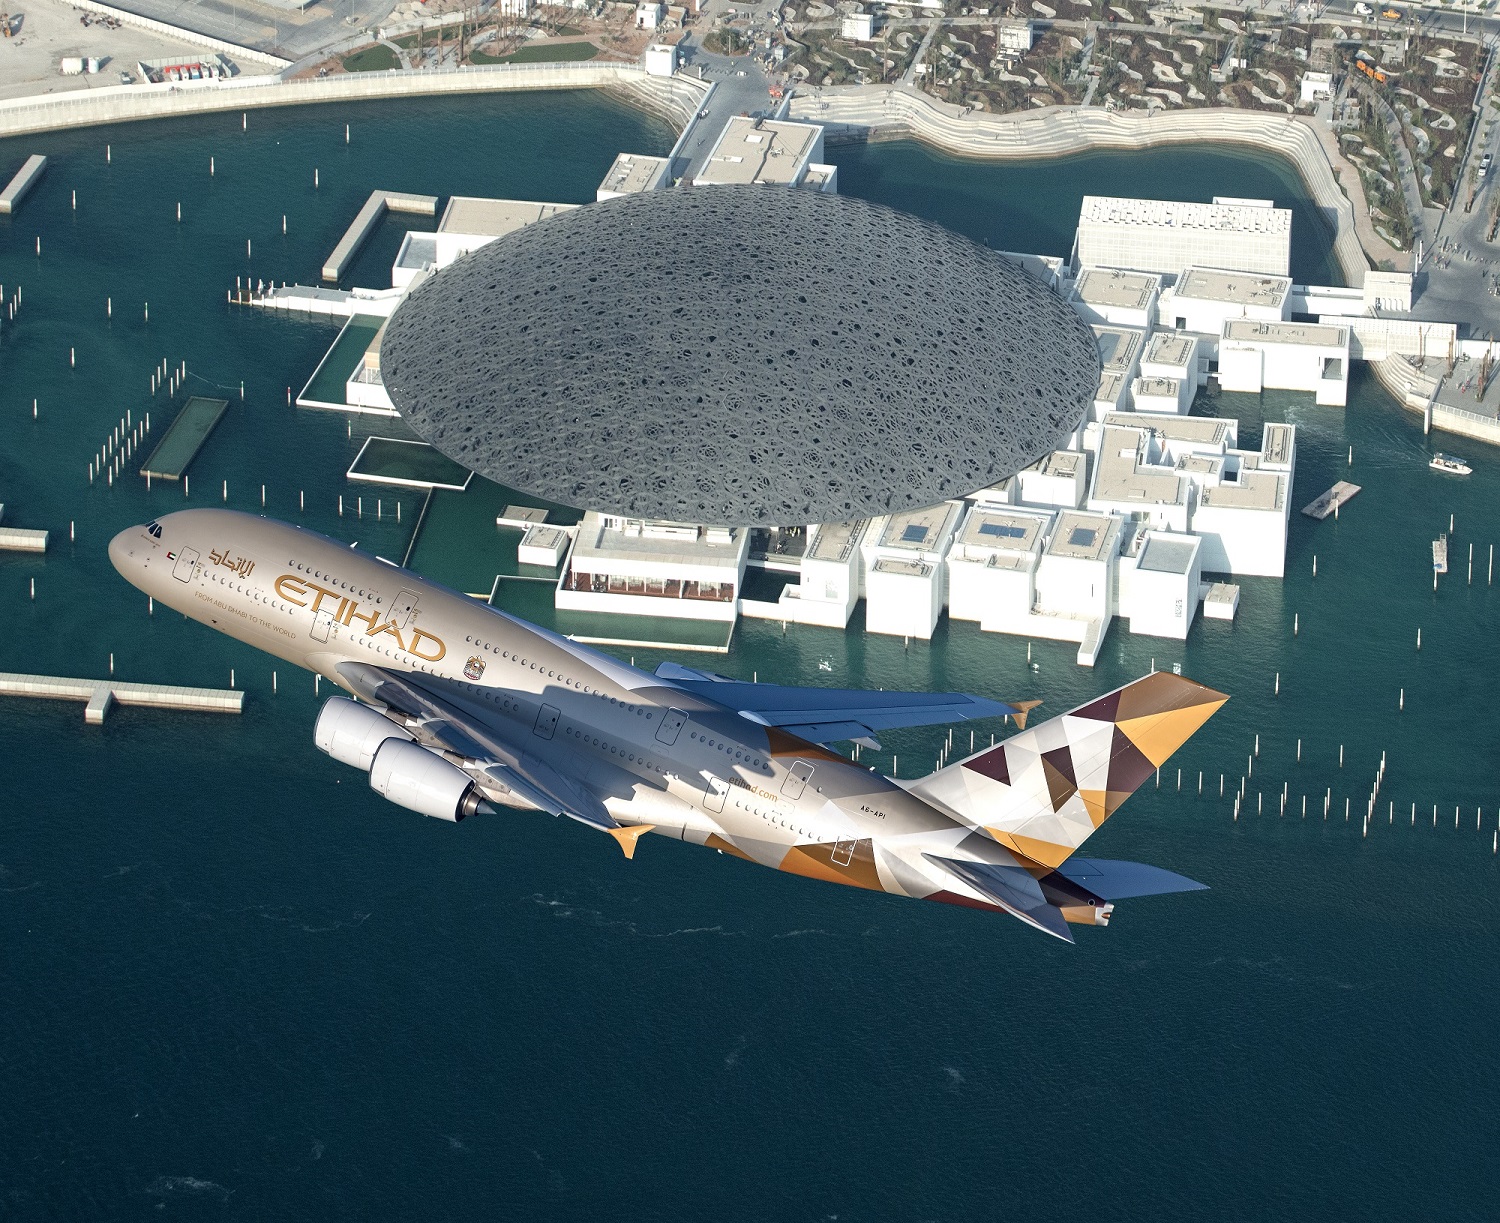 Etihad Airways Transformation On Track, With 55% Cumulative Improvement In Core Results Since 2017